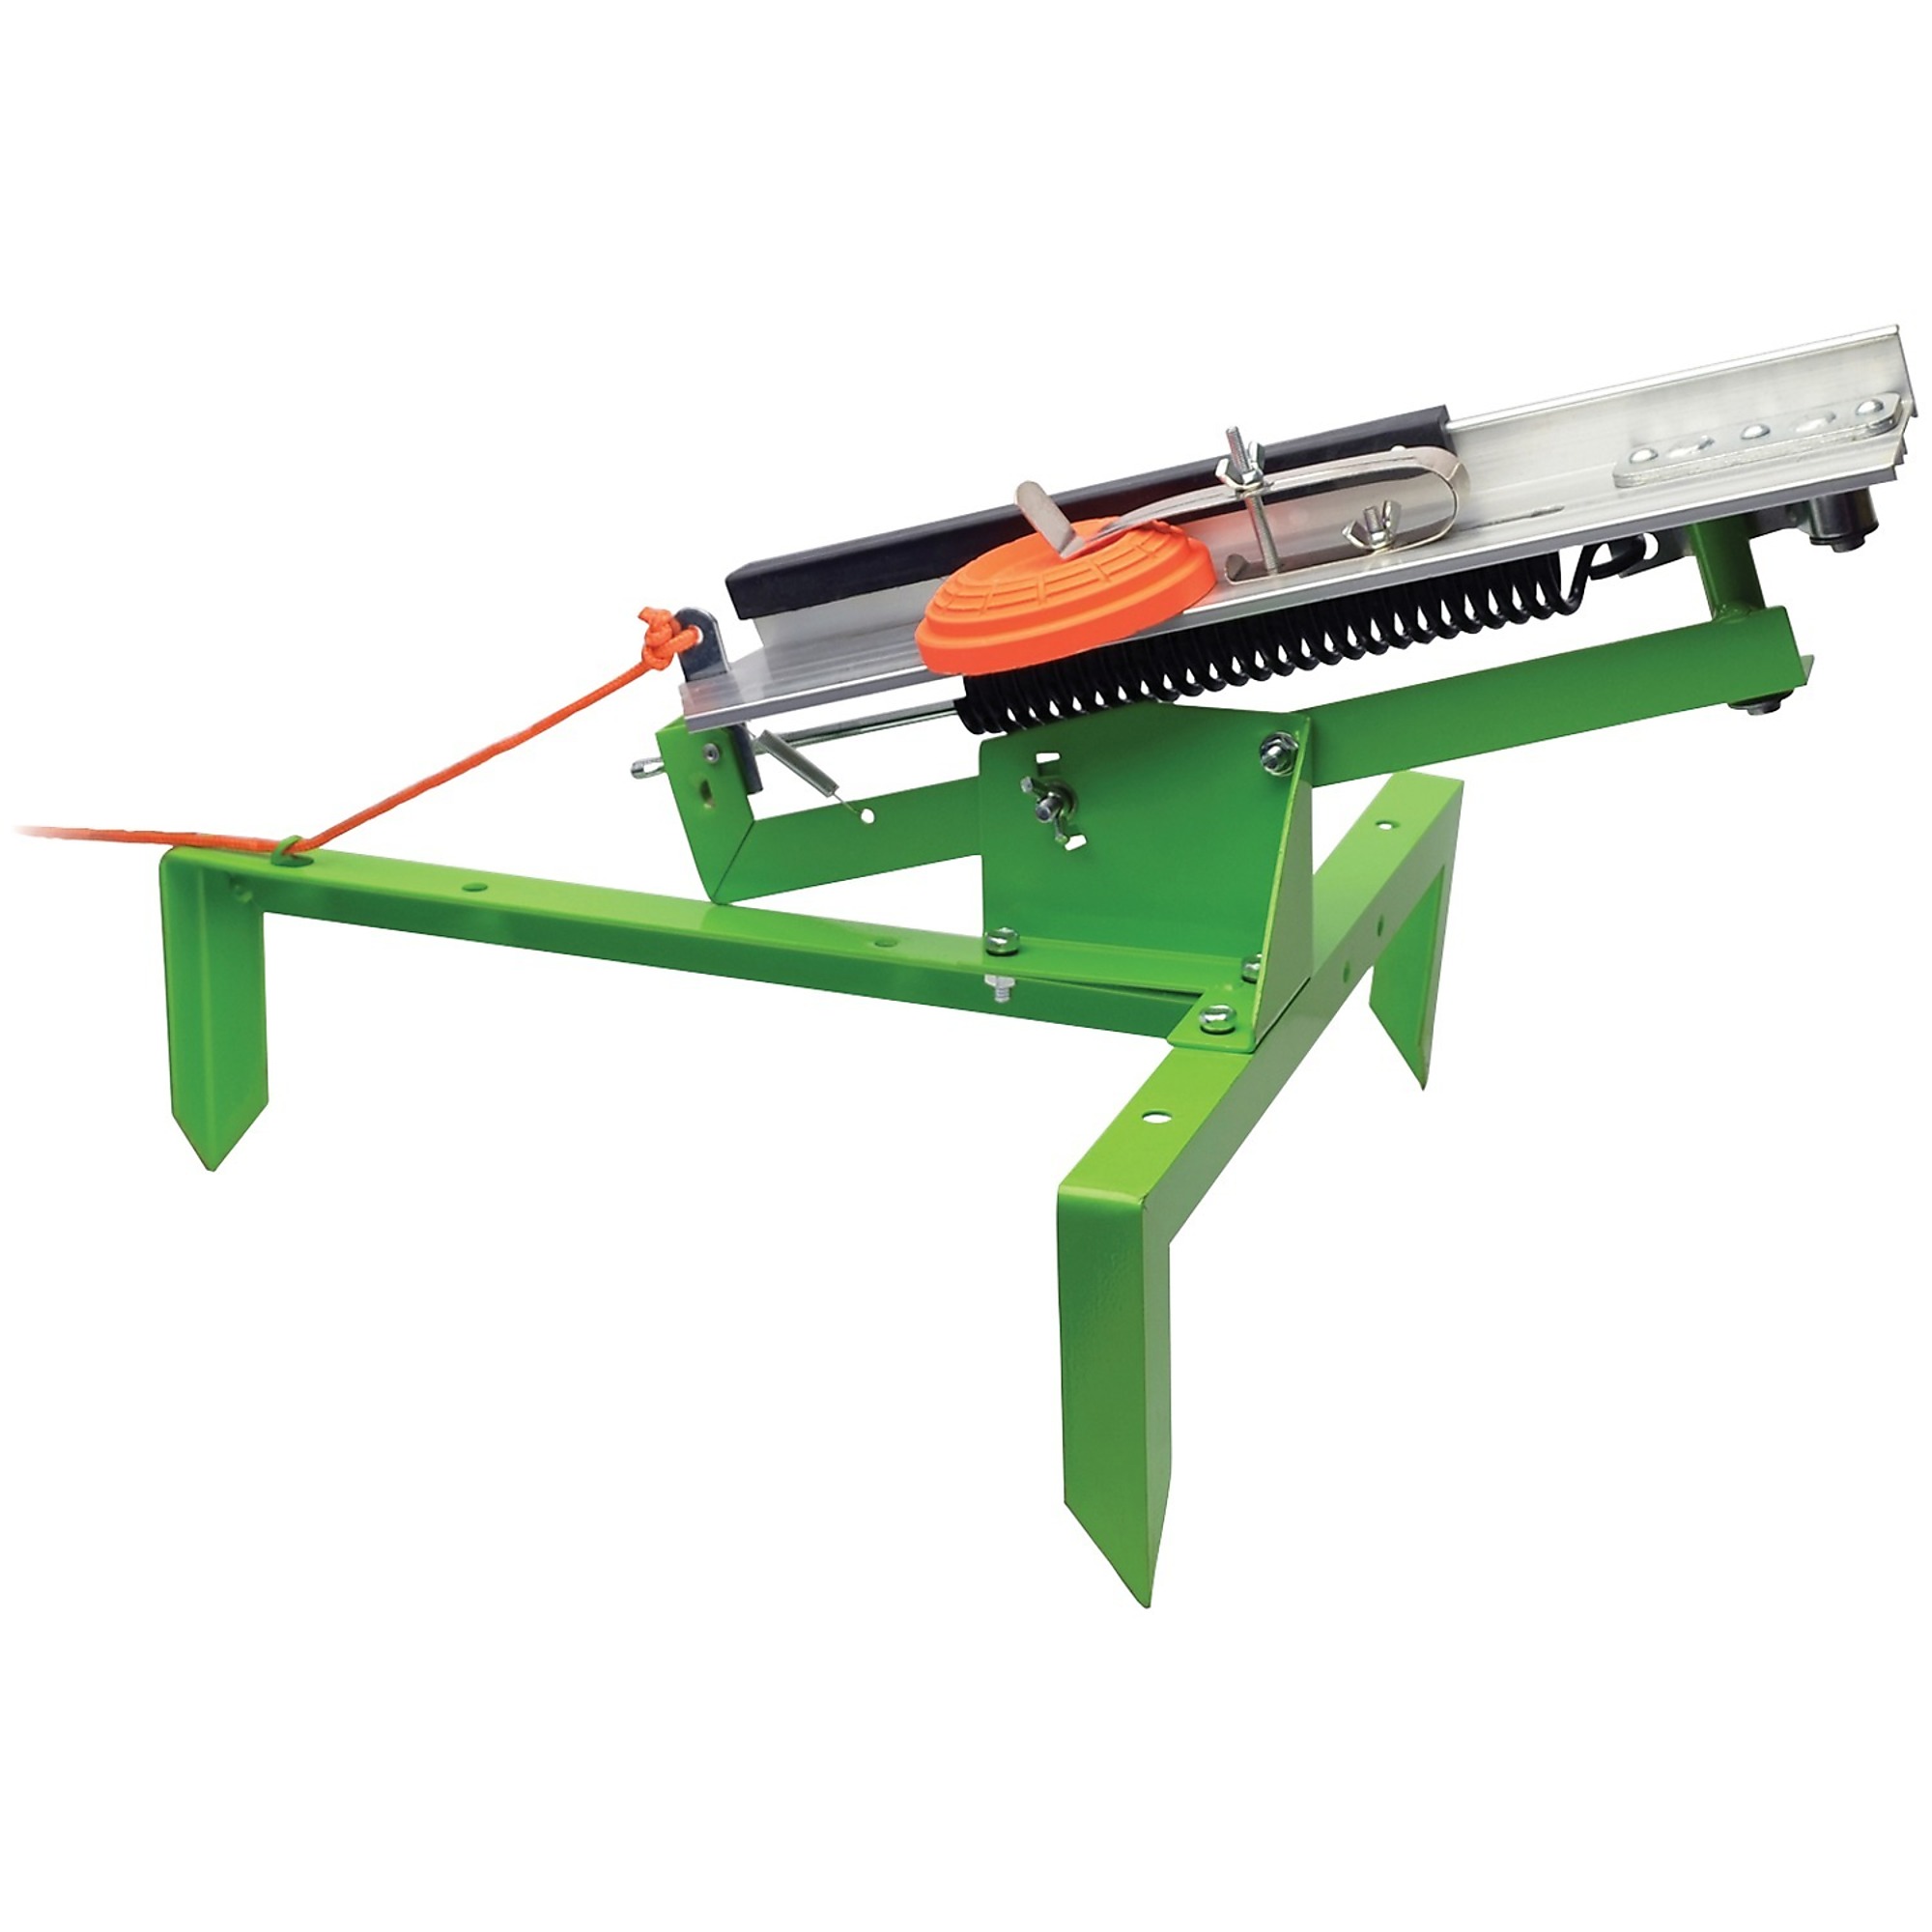 SME, Full-Cock Clay Target Trap Thrower, Color Green, Material Steel, Model SME-FCT